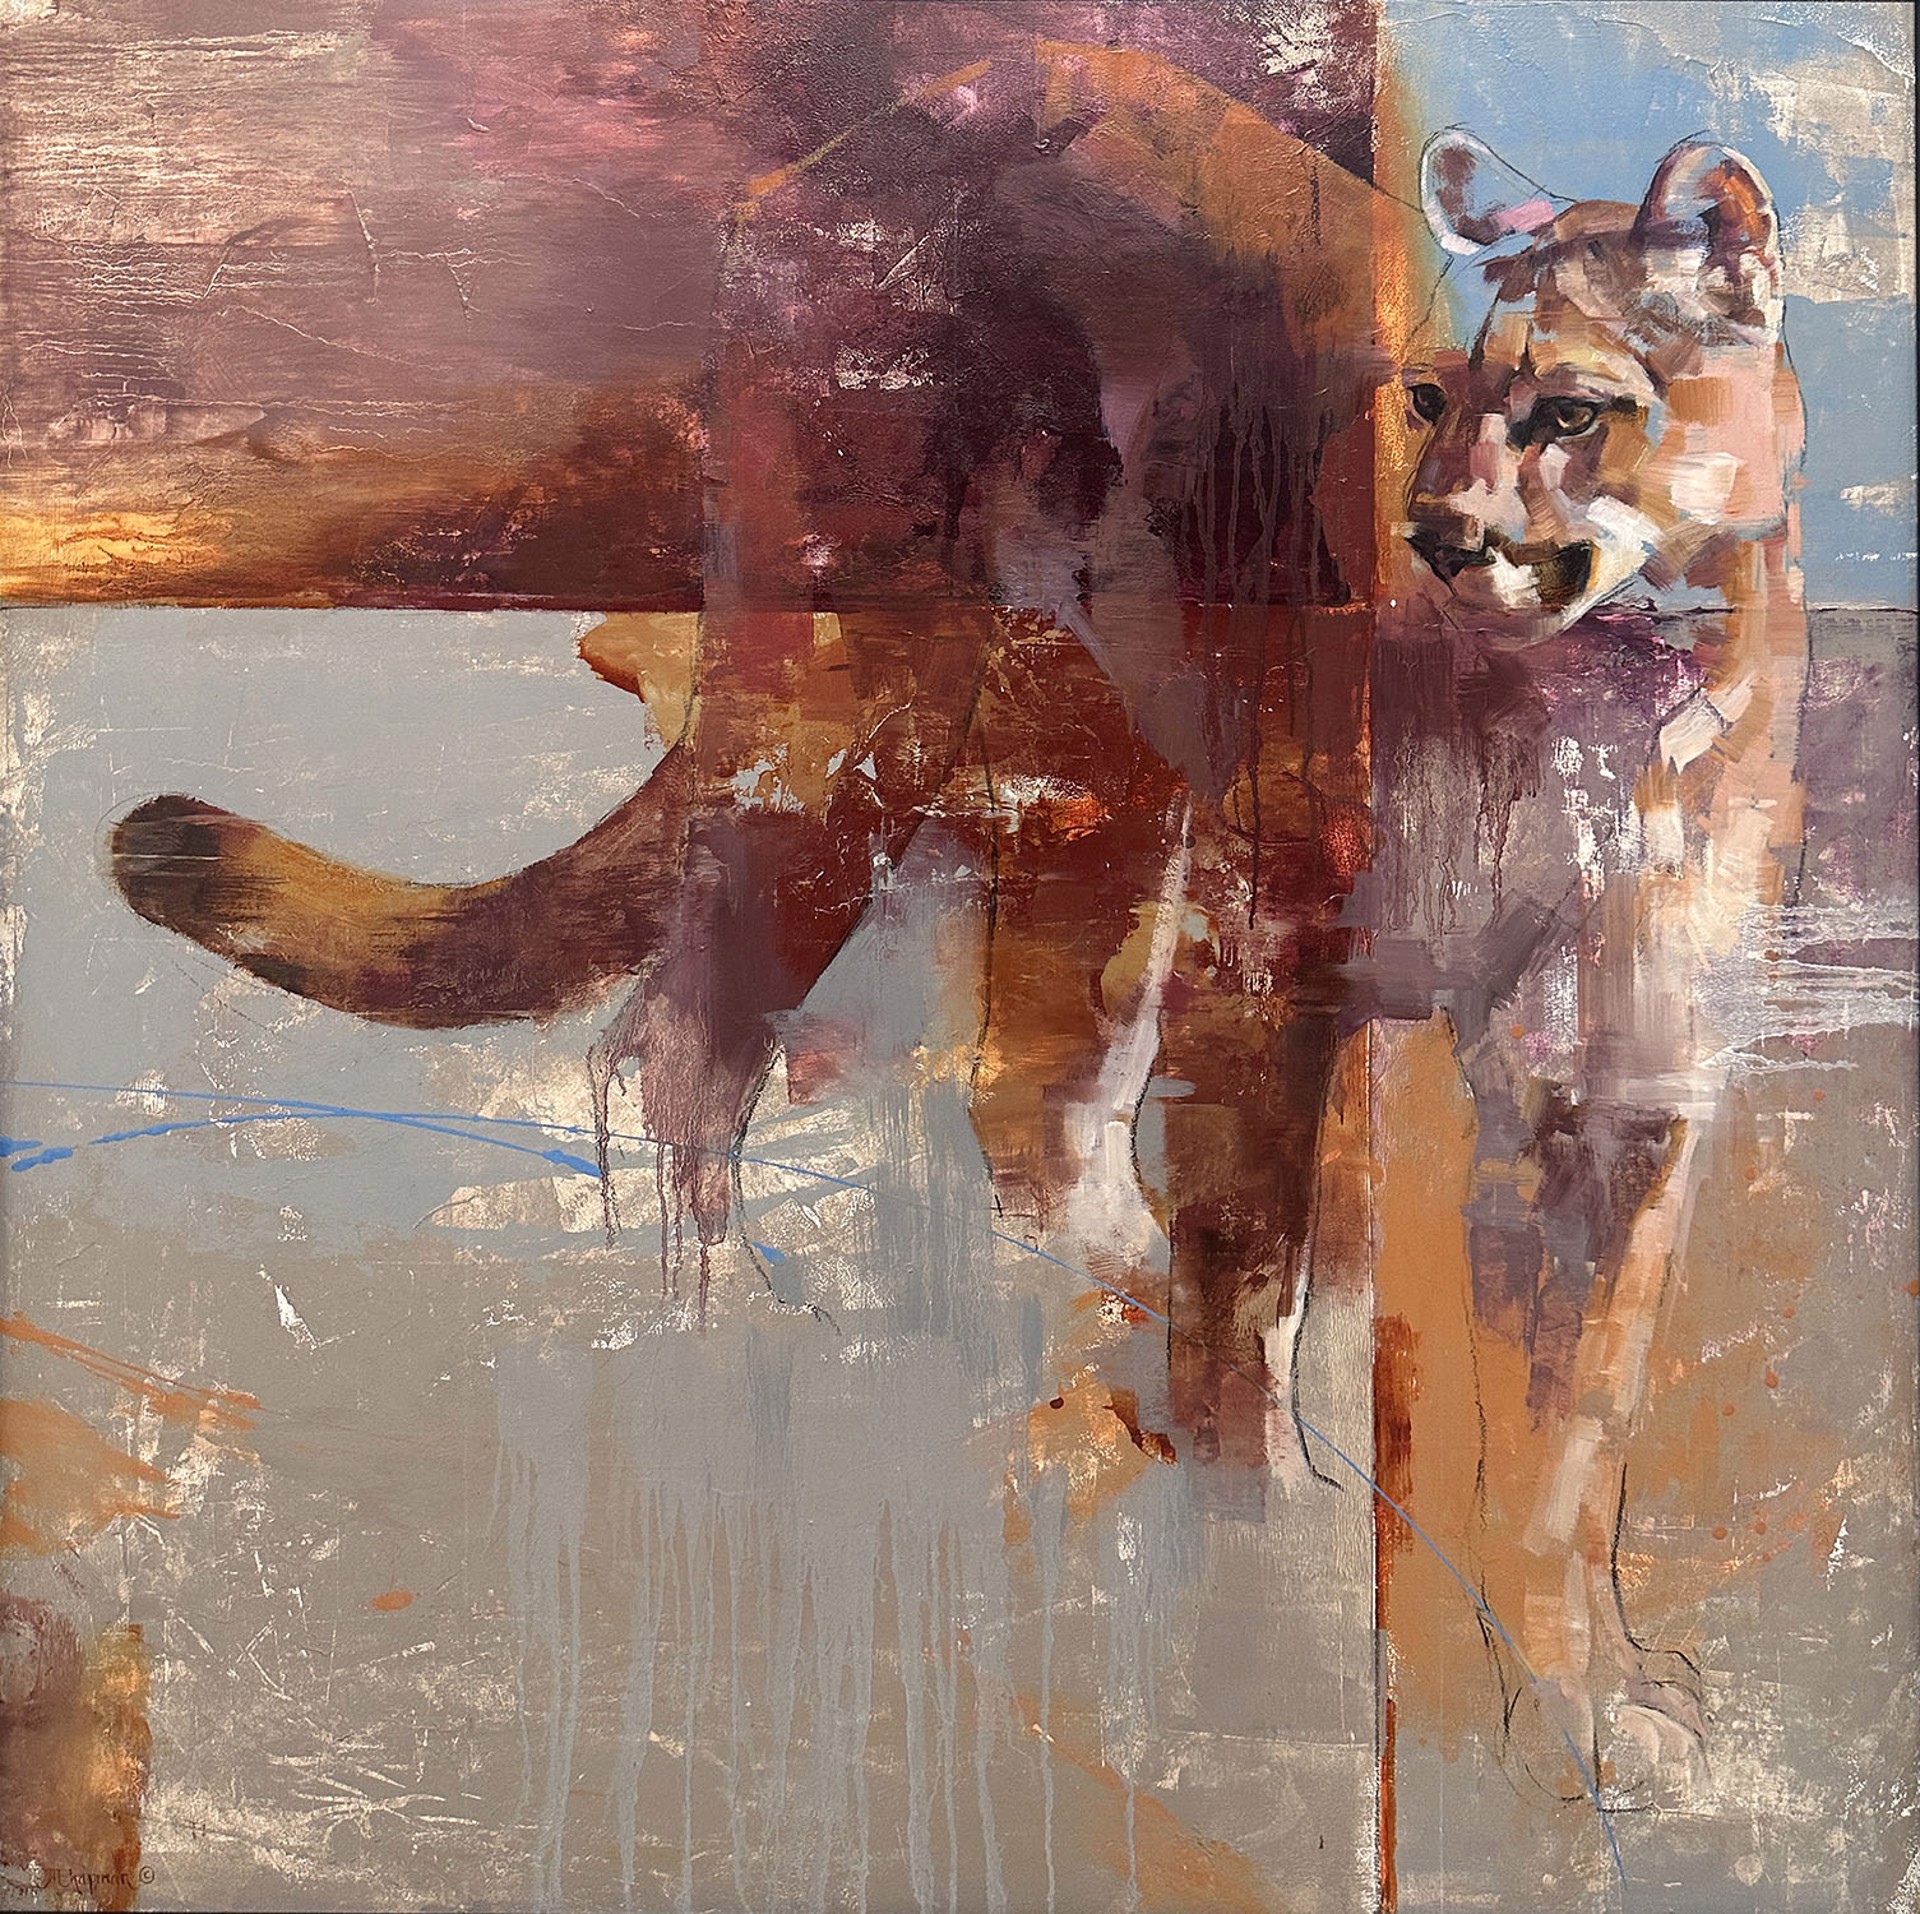 Original Mixed Media Painting By Julie Chapman Featuring An Adult Mountain Lion In Expressive Brushstrokes Integrated Into Abstracted Quadrant Background In Neutral Tones